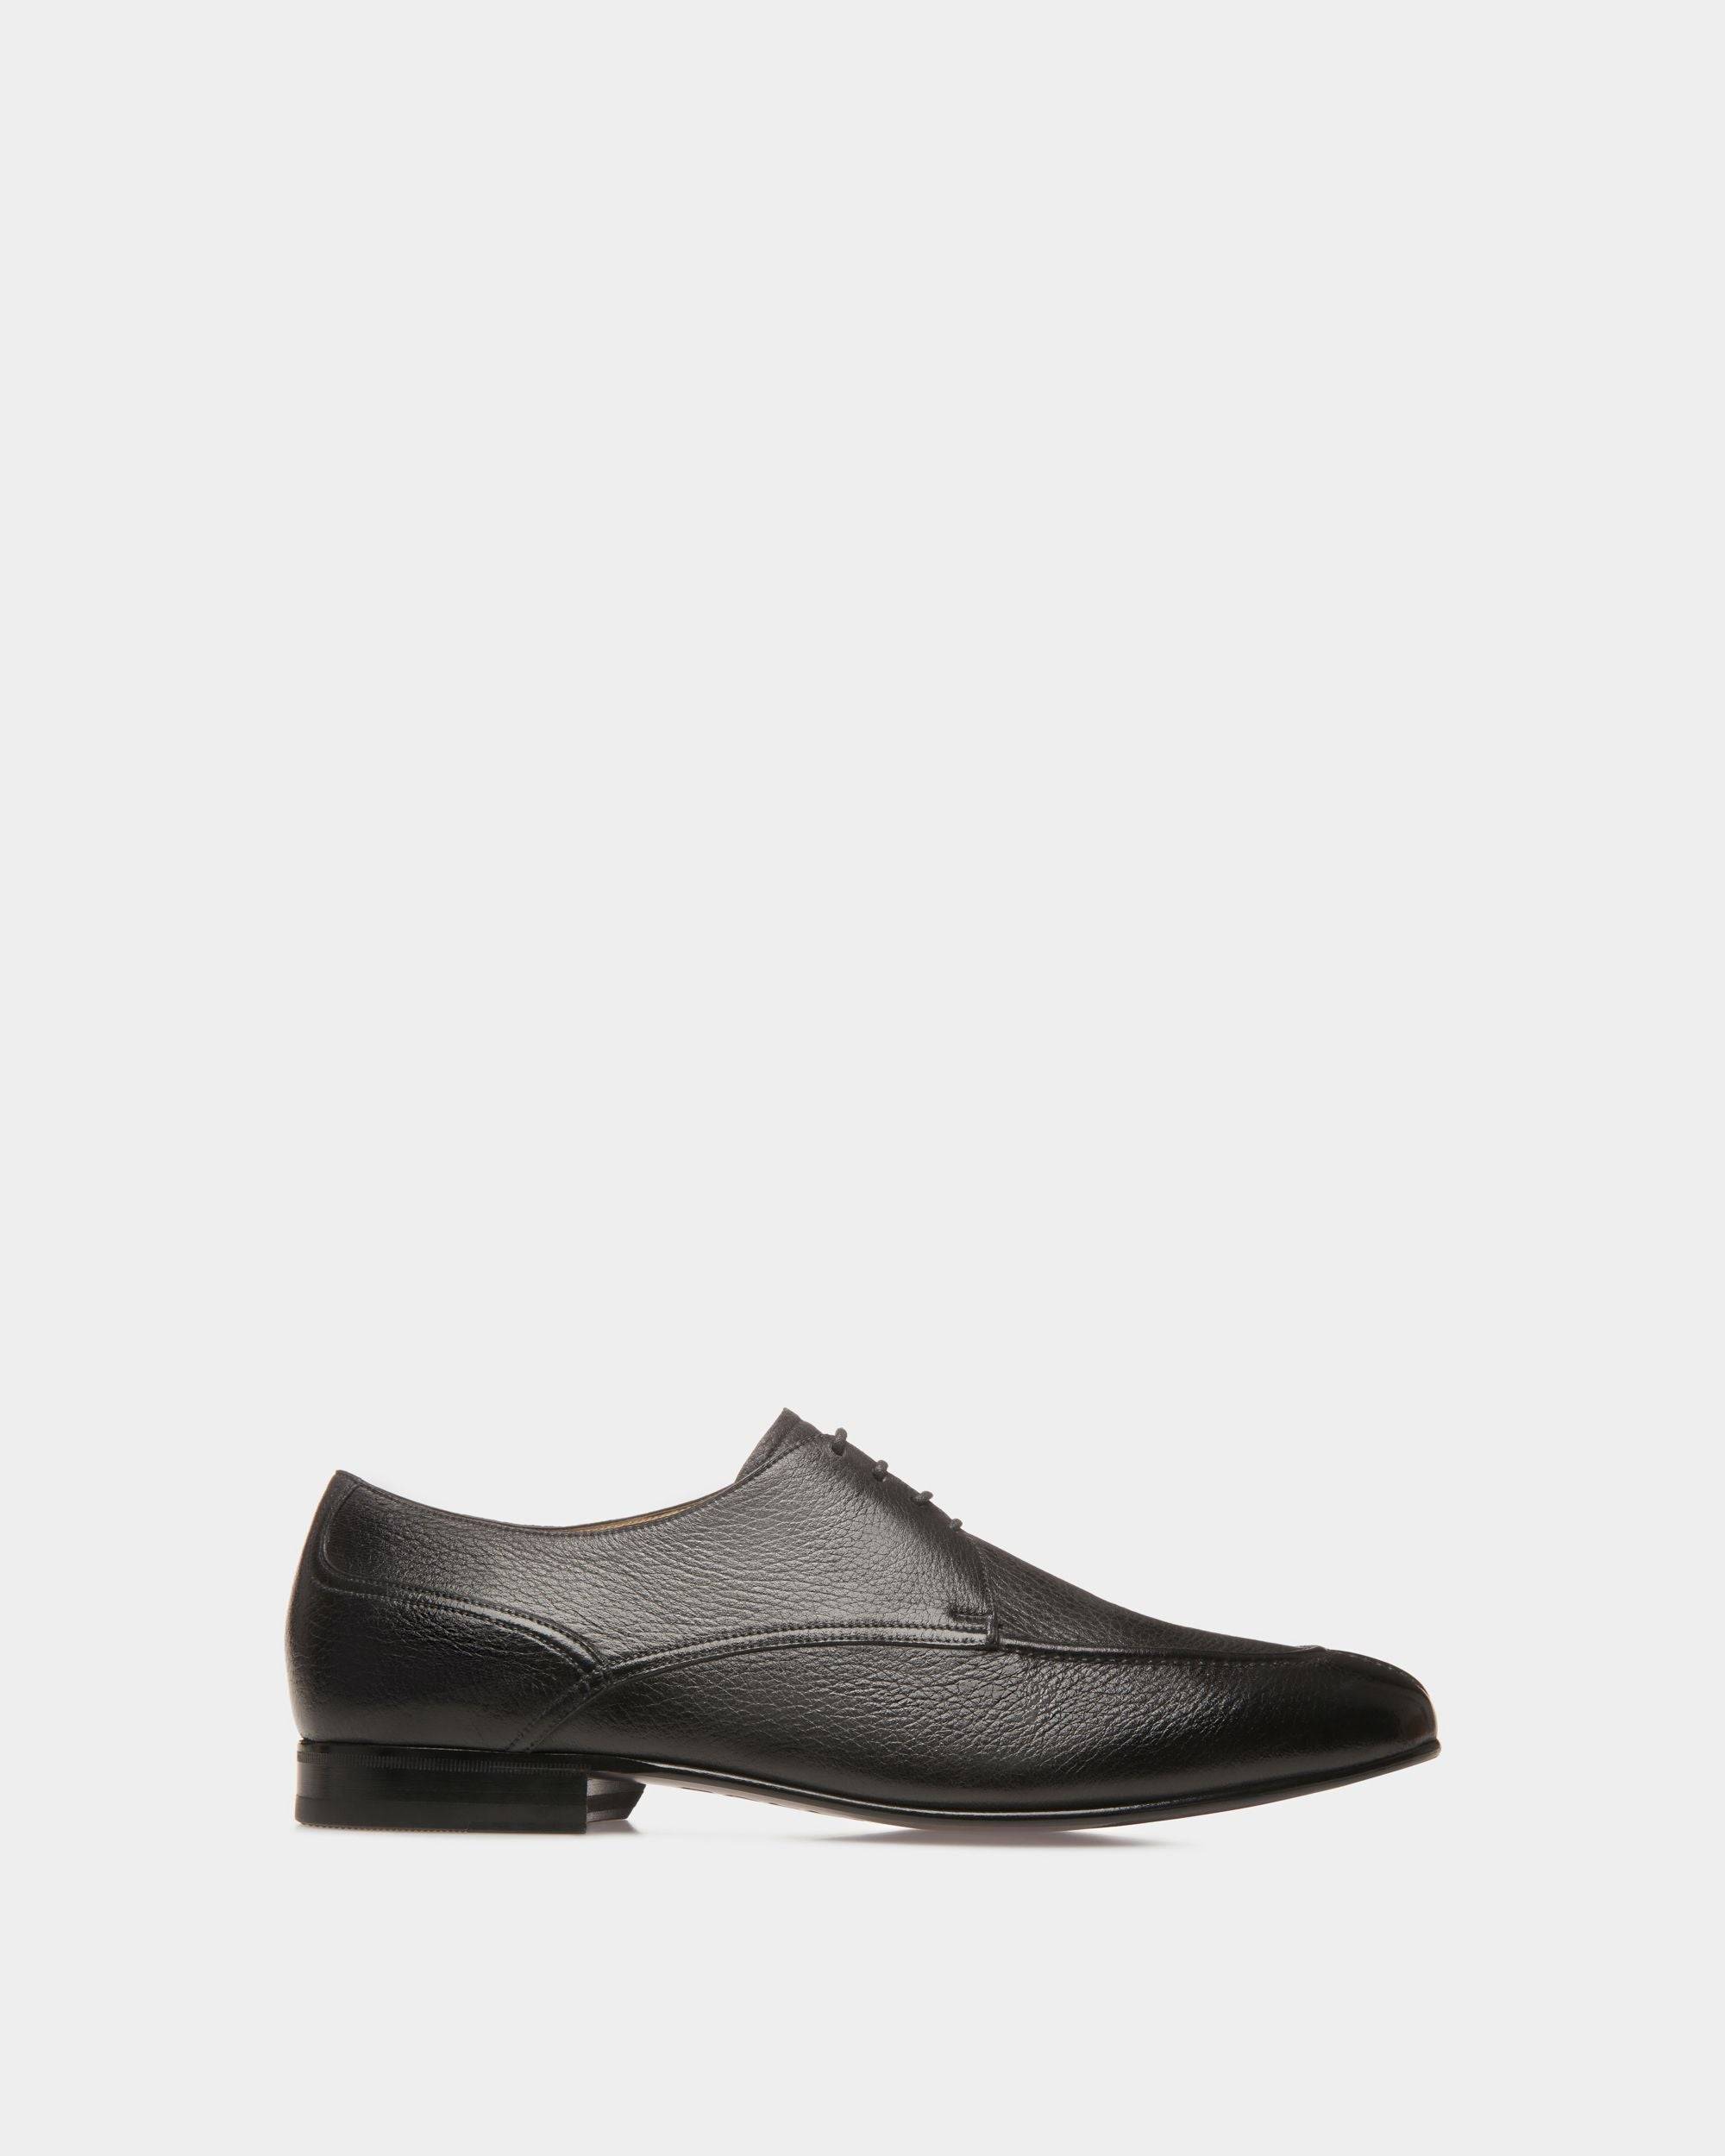 Men's Suisse Derby Shoes In Black Leather | Bally | Still Life Side